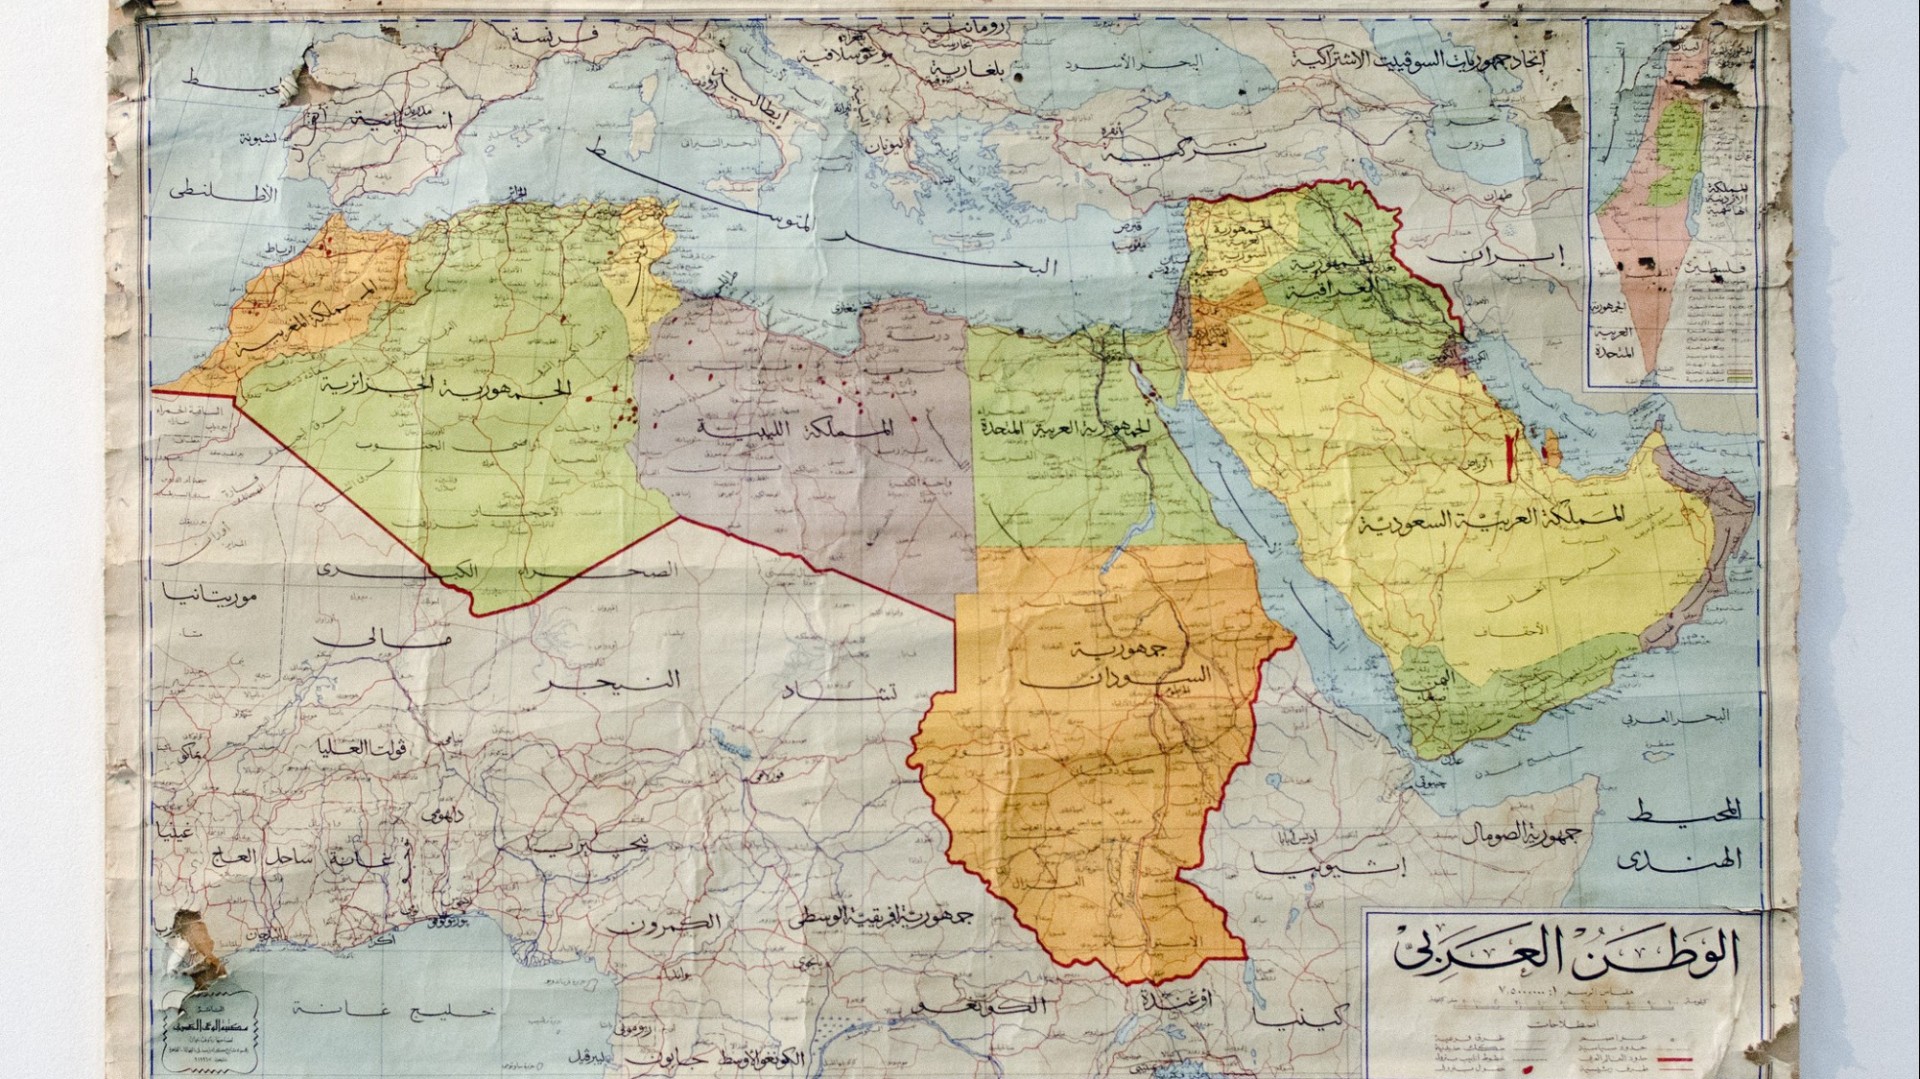 Arabic map of middle east and north Africa